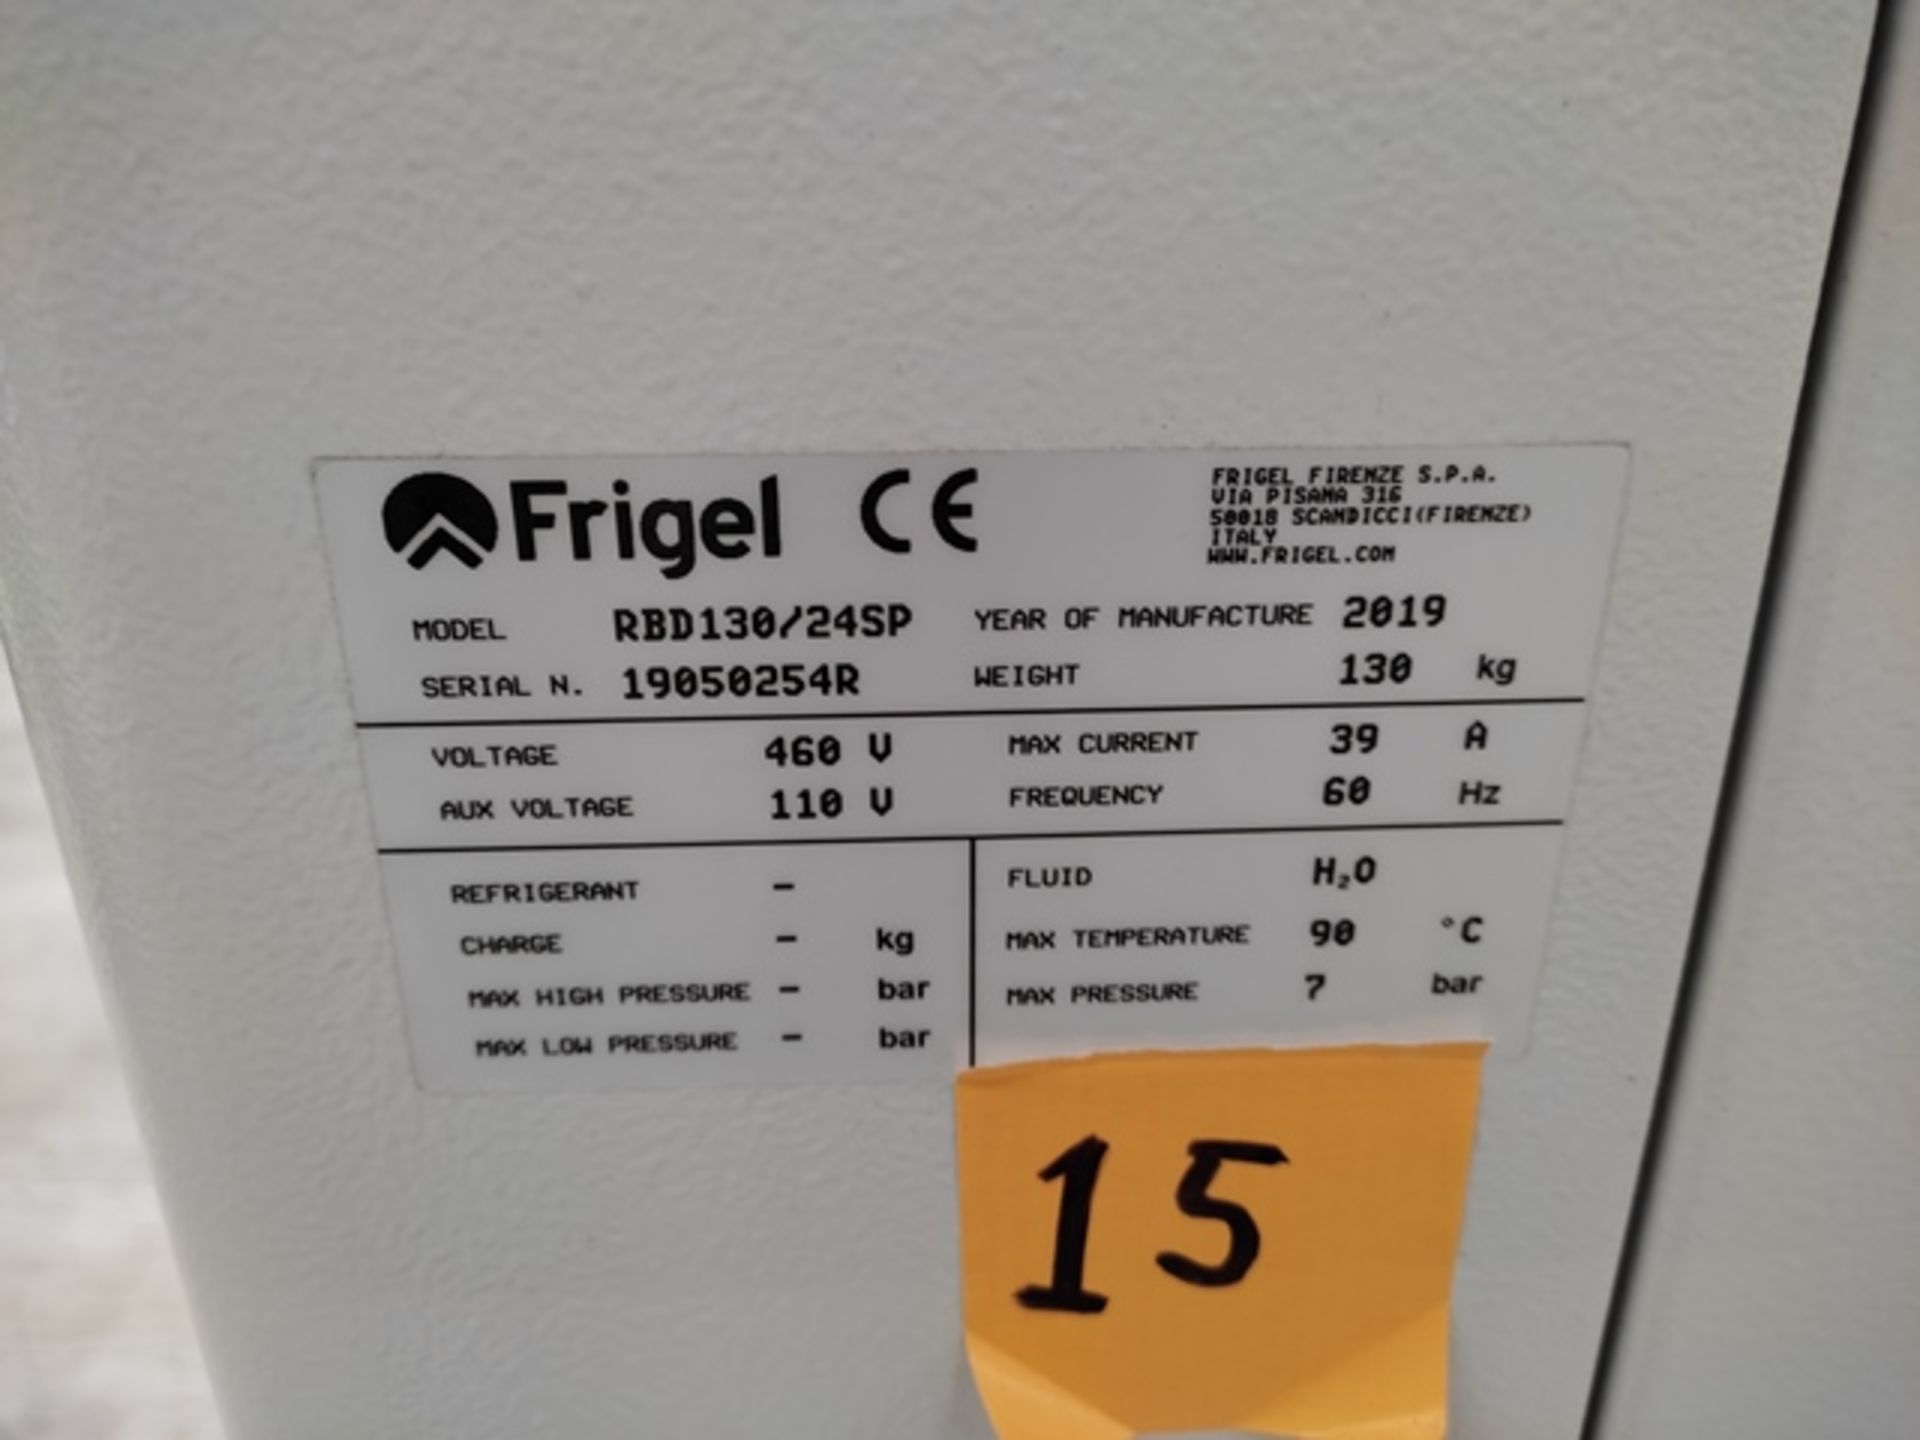 Lot of: (2) Frigel RBD130/24 SP 24 KW Flow Booster Temperature Controller, Mfg. Year: 2019 - Image 11 of 11